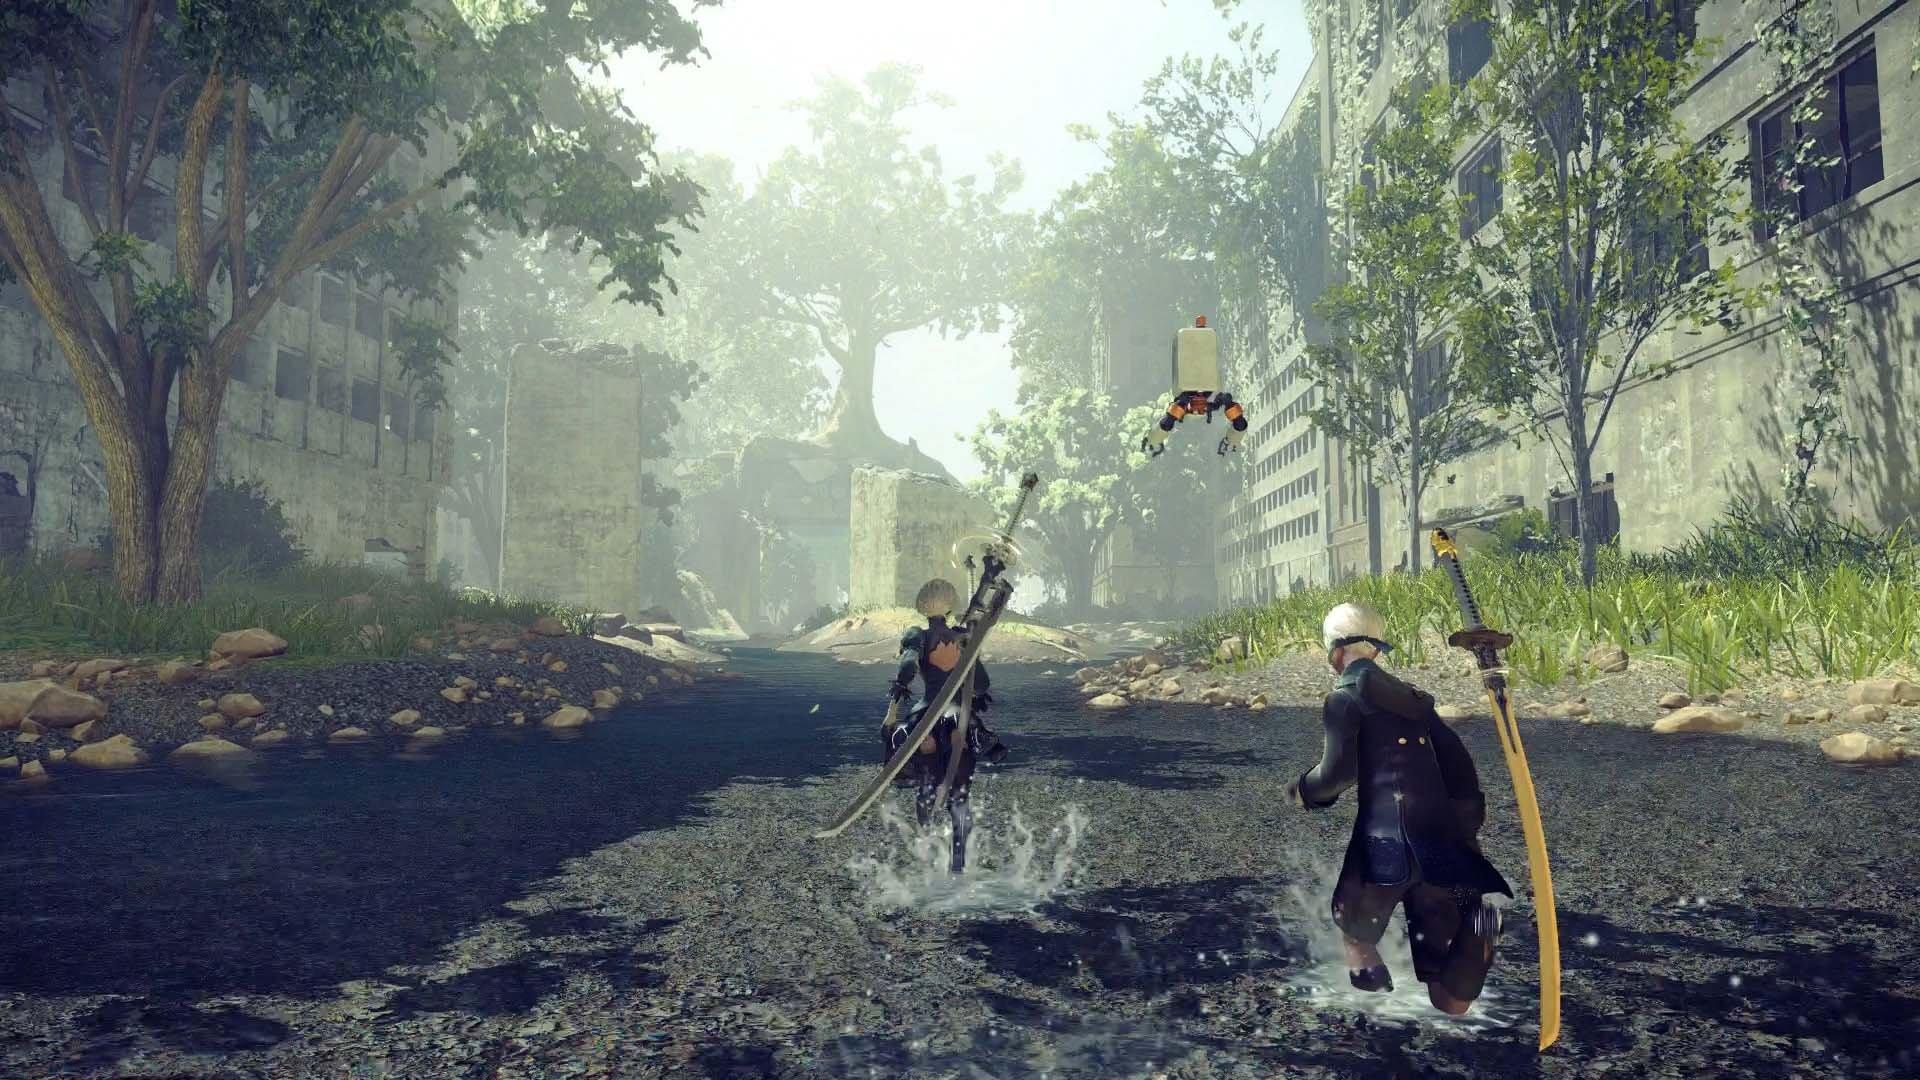 Game of the yorha edition. NIER: Automata (ps4). NIER Xbox 360. 2b NIER Automata игра. NIER Automata плейстейшен.